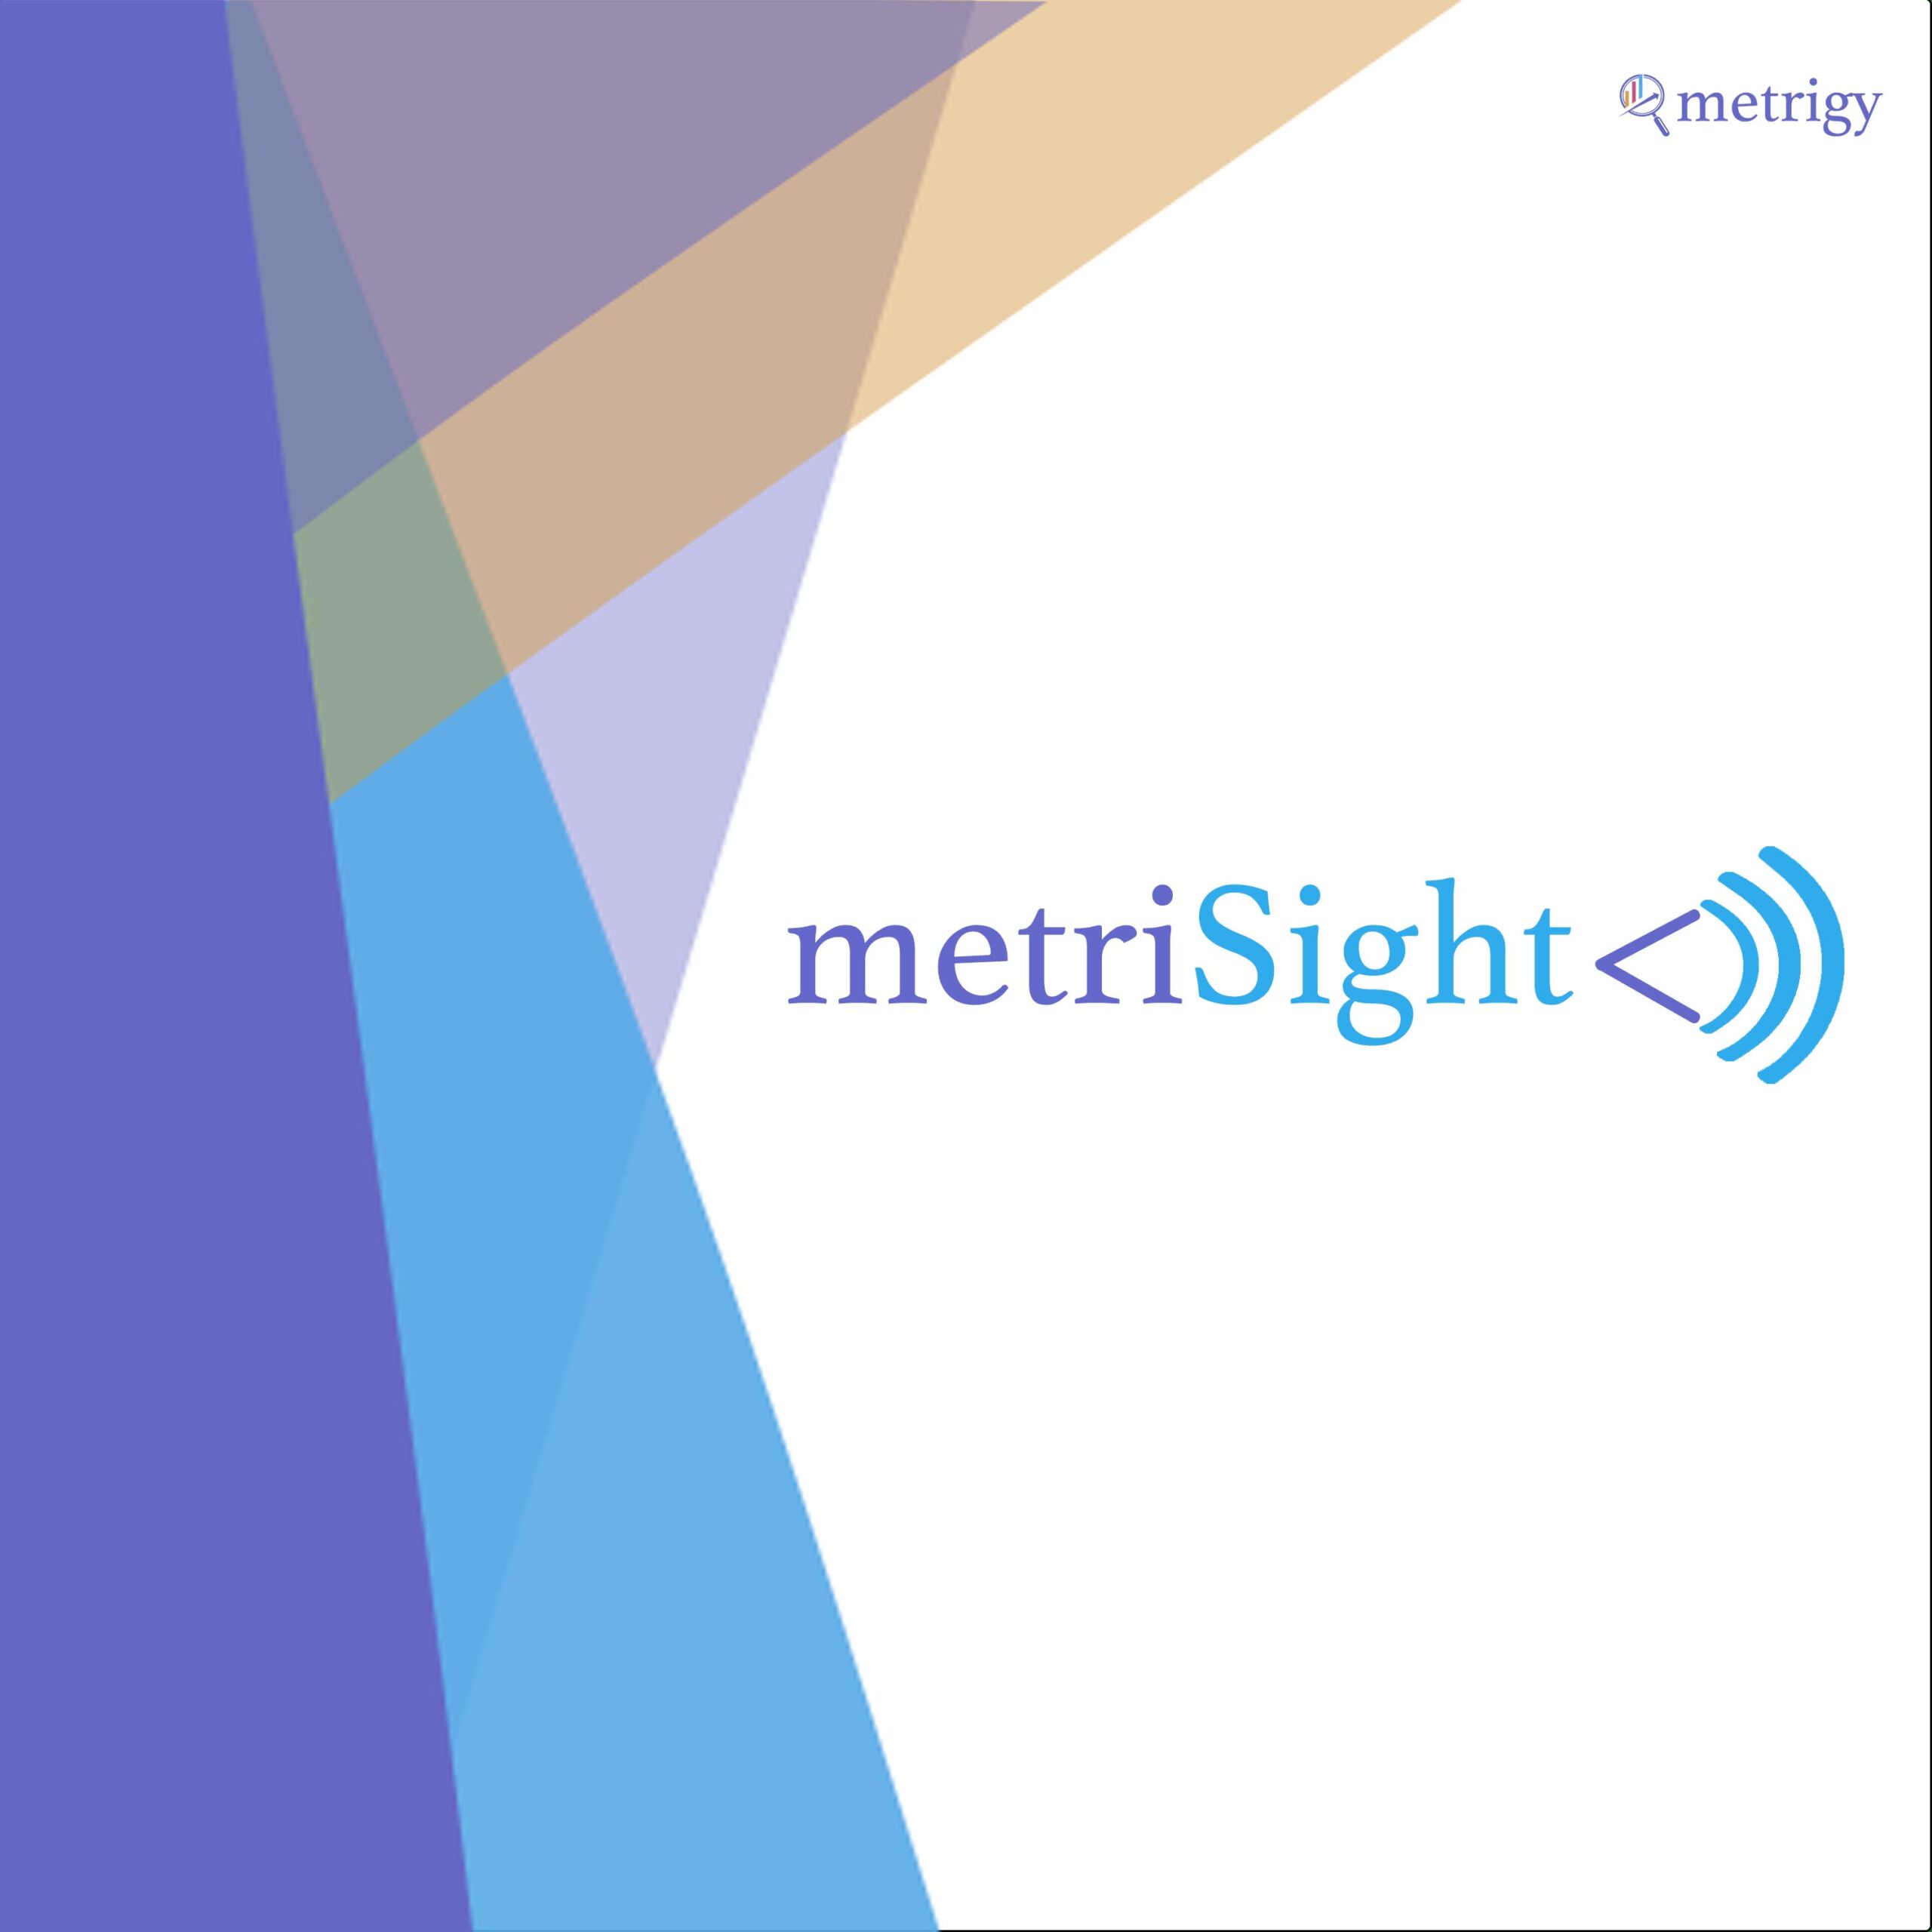 MetriSight Ep.39 - Why Employee Experience is Crucial to Intradiem CEO Matt McConnell